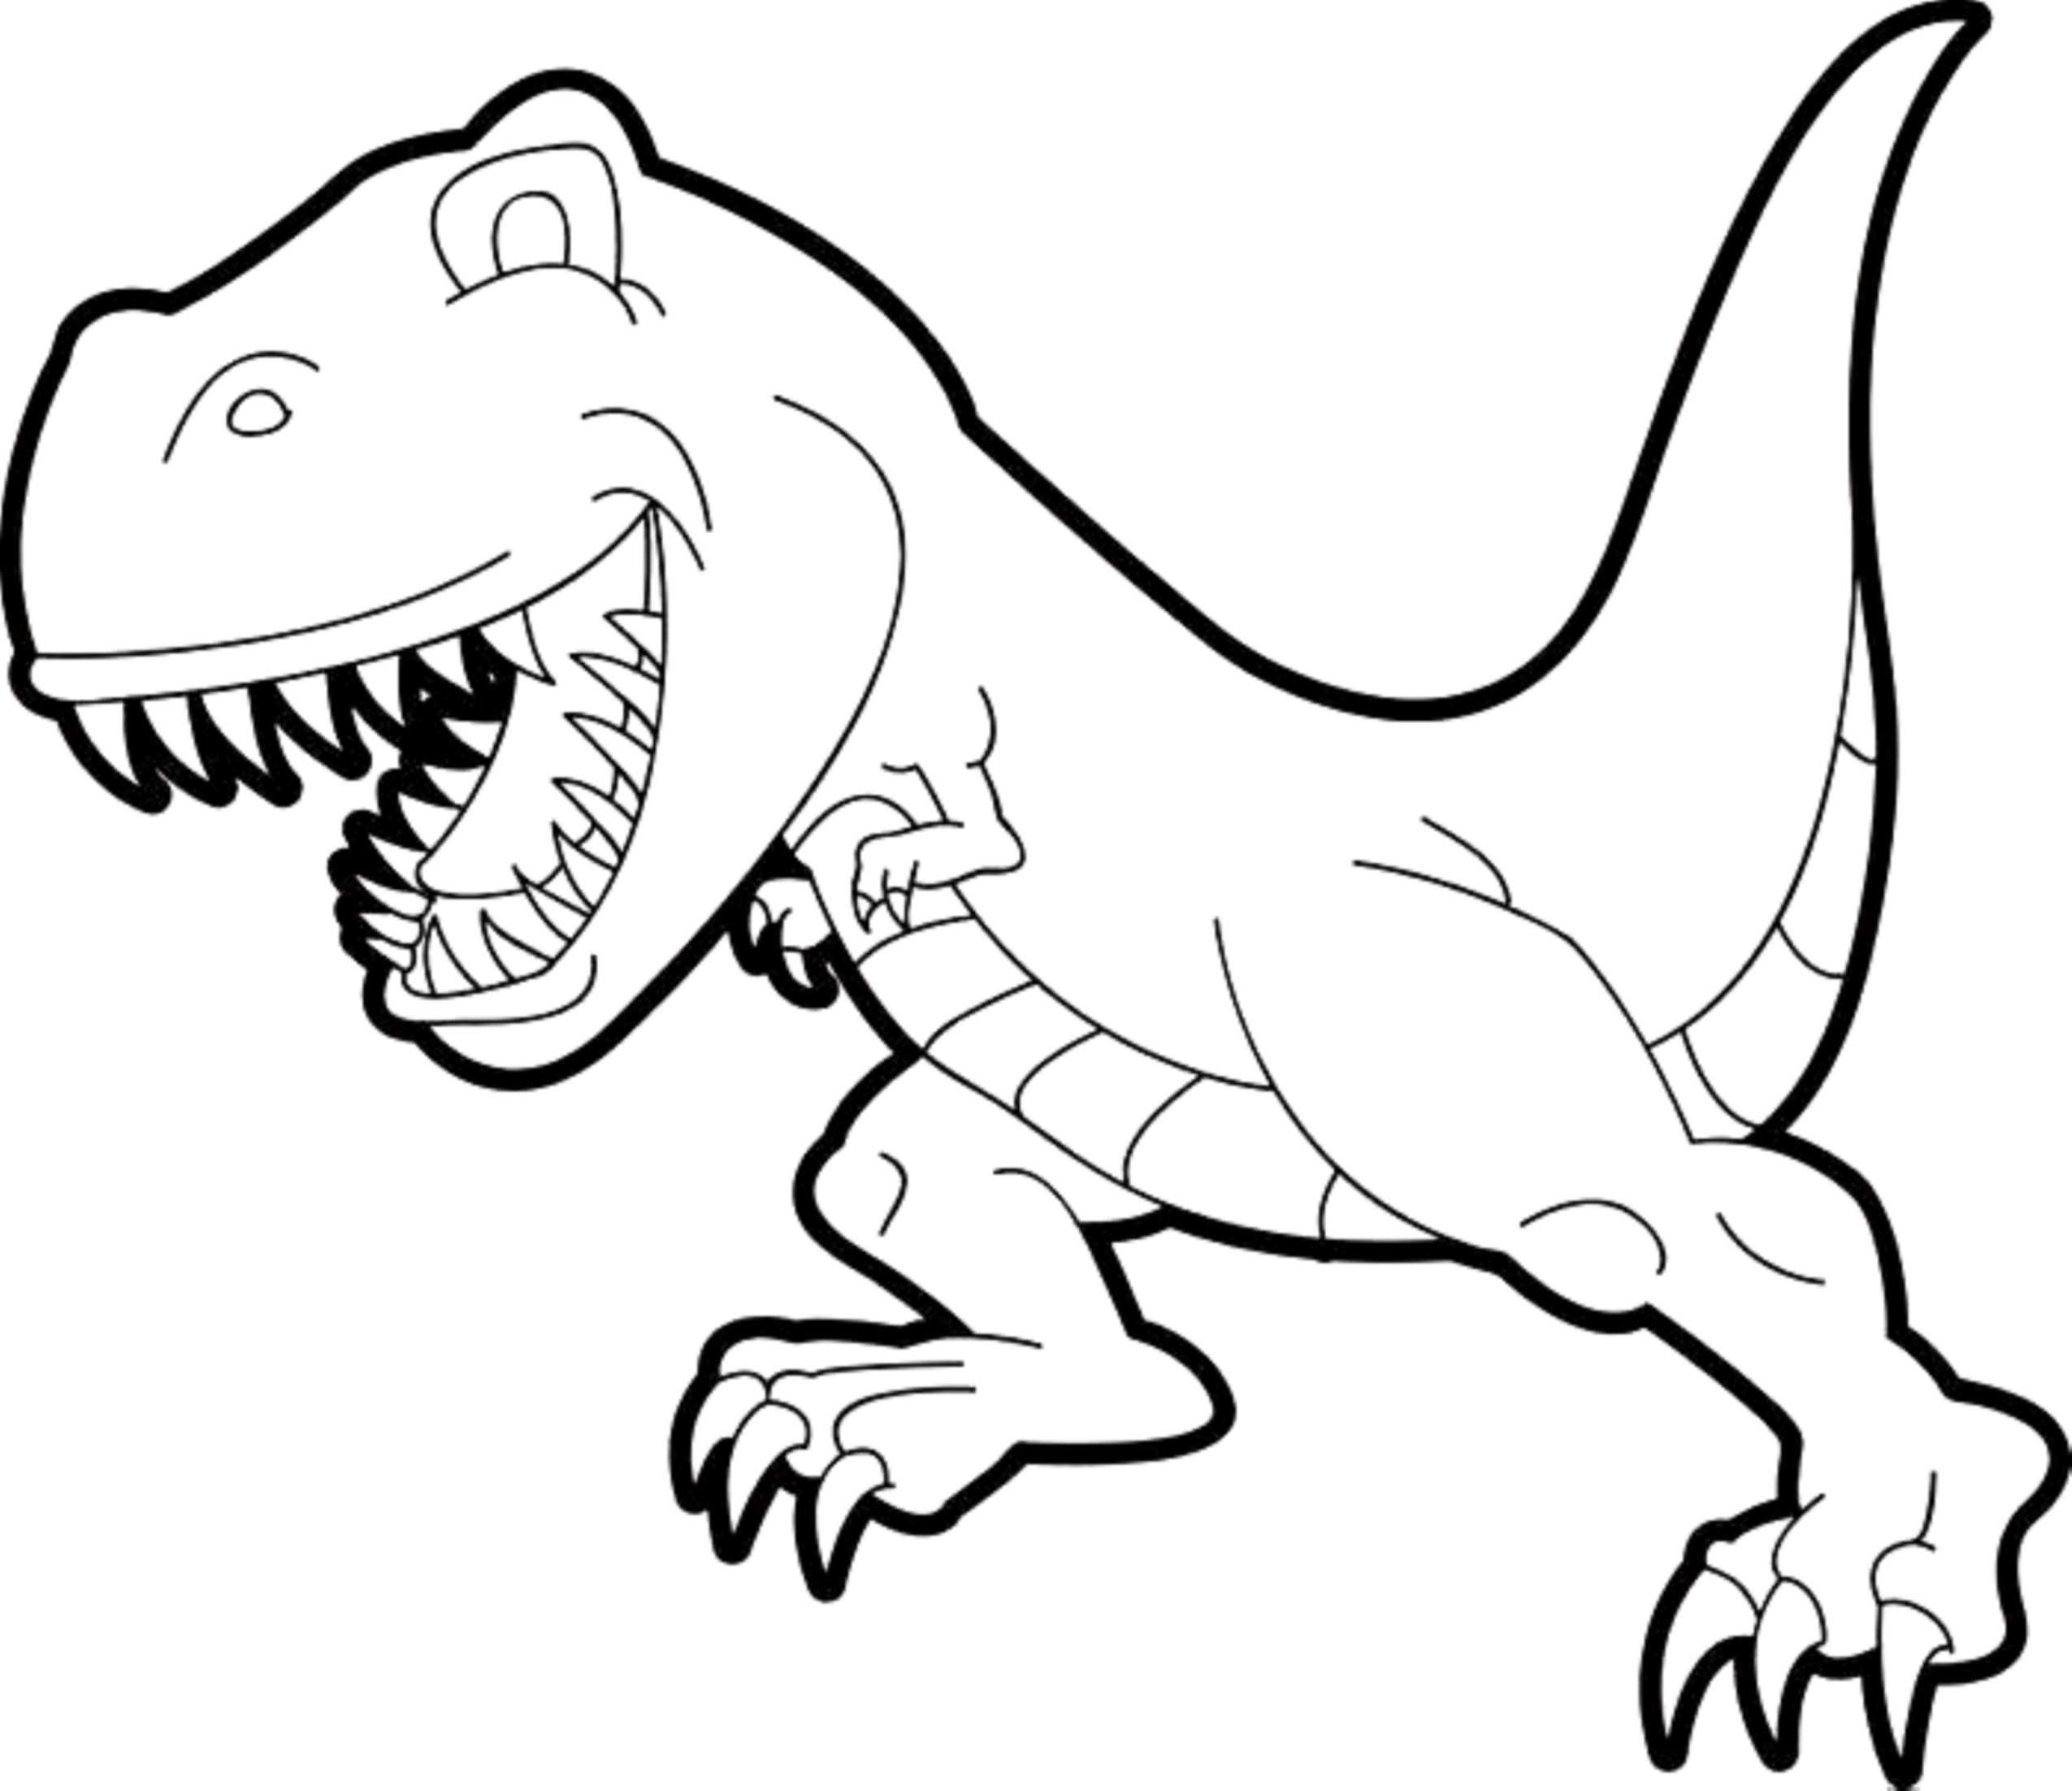 Insider Scary Dinosaur Coloring Pages Simple T Rex Kids Colouring Pinterest Dino